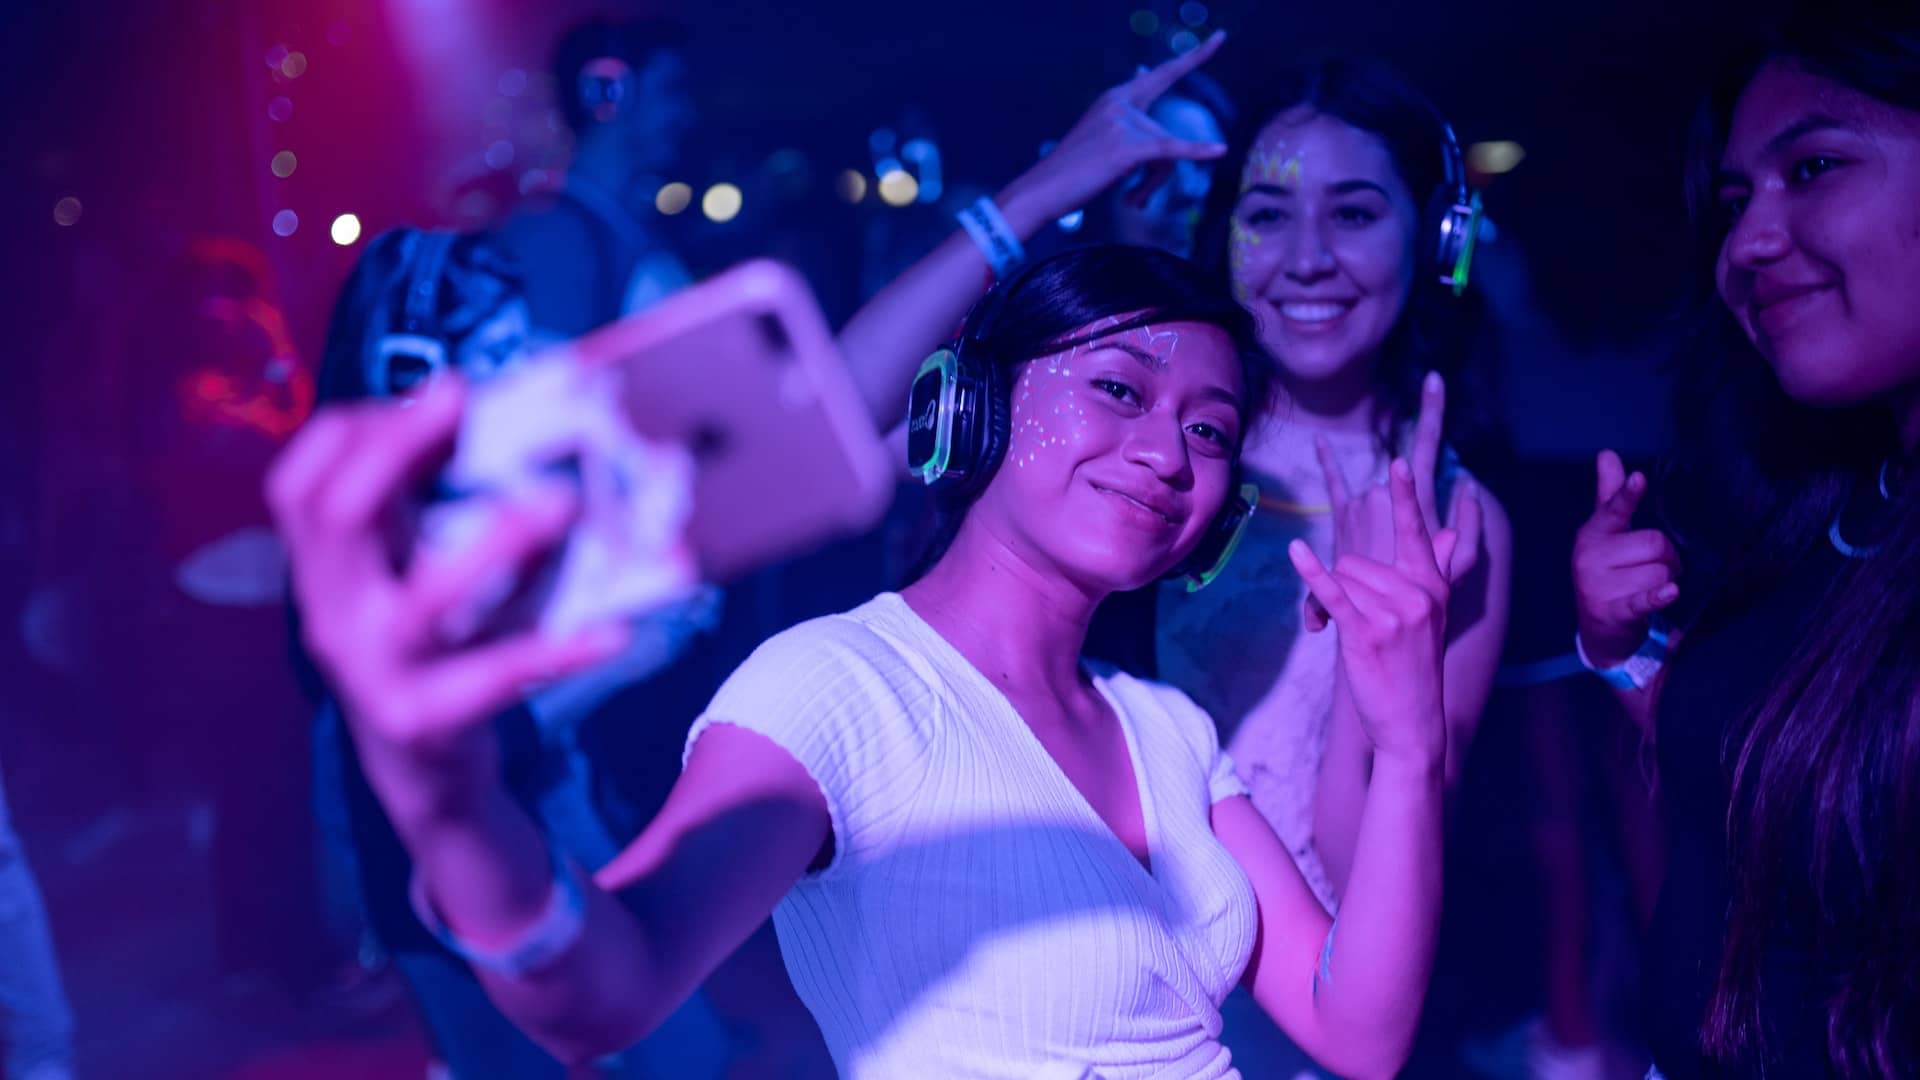 A young woman dances at a concert with her phone